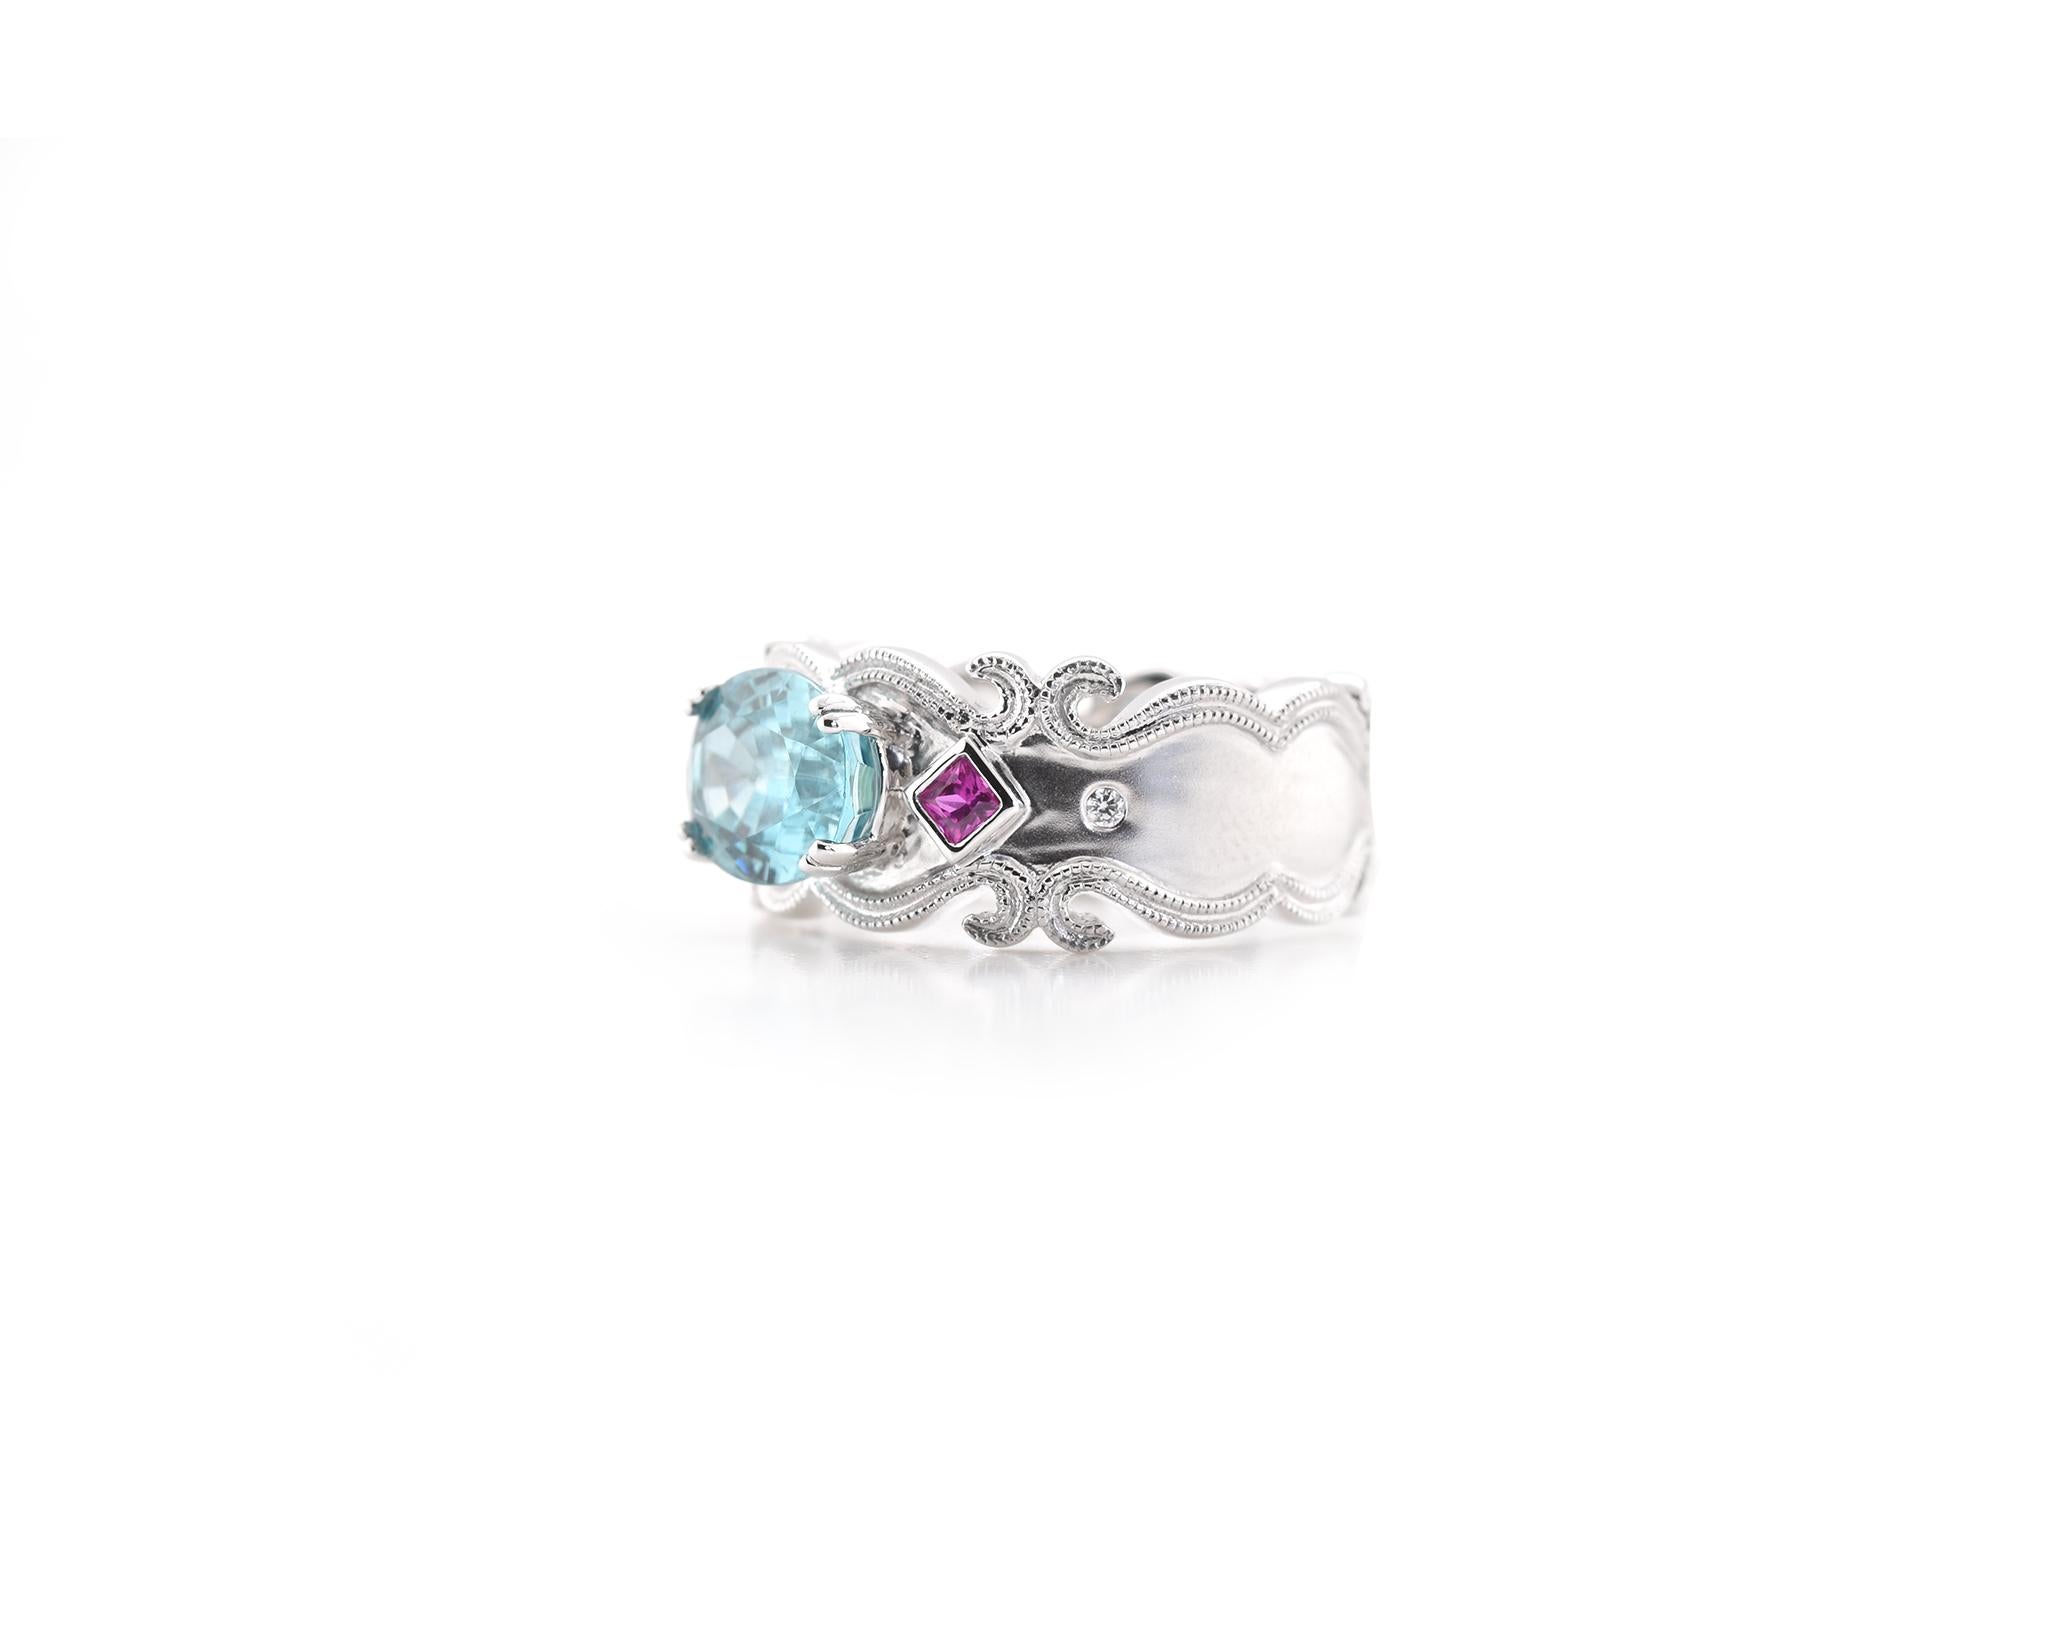 Material: 18k white gold
Zircon: 1 oval cut blue zircon = 3.18cttw
Sapphire: 2 princess cut pink sapphires = 0.14cttw
Ring Size: 6 ½ (allow up to two additional business days for sizing requests)
Weight: 7.78 grams
